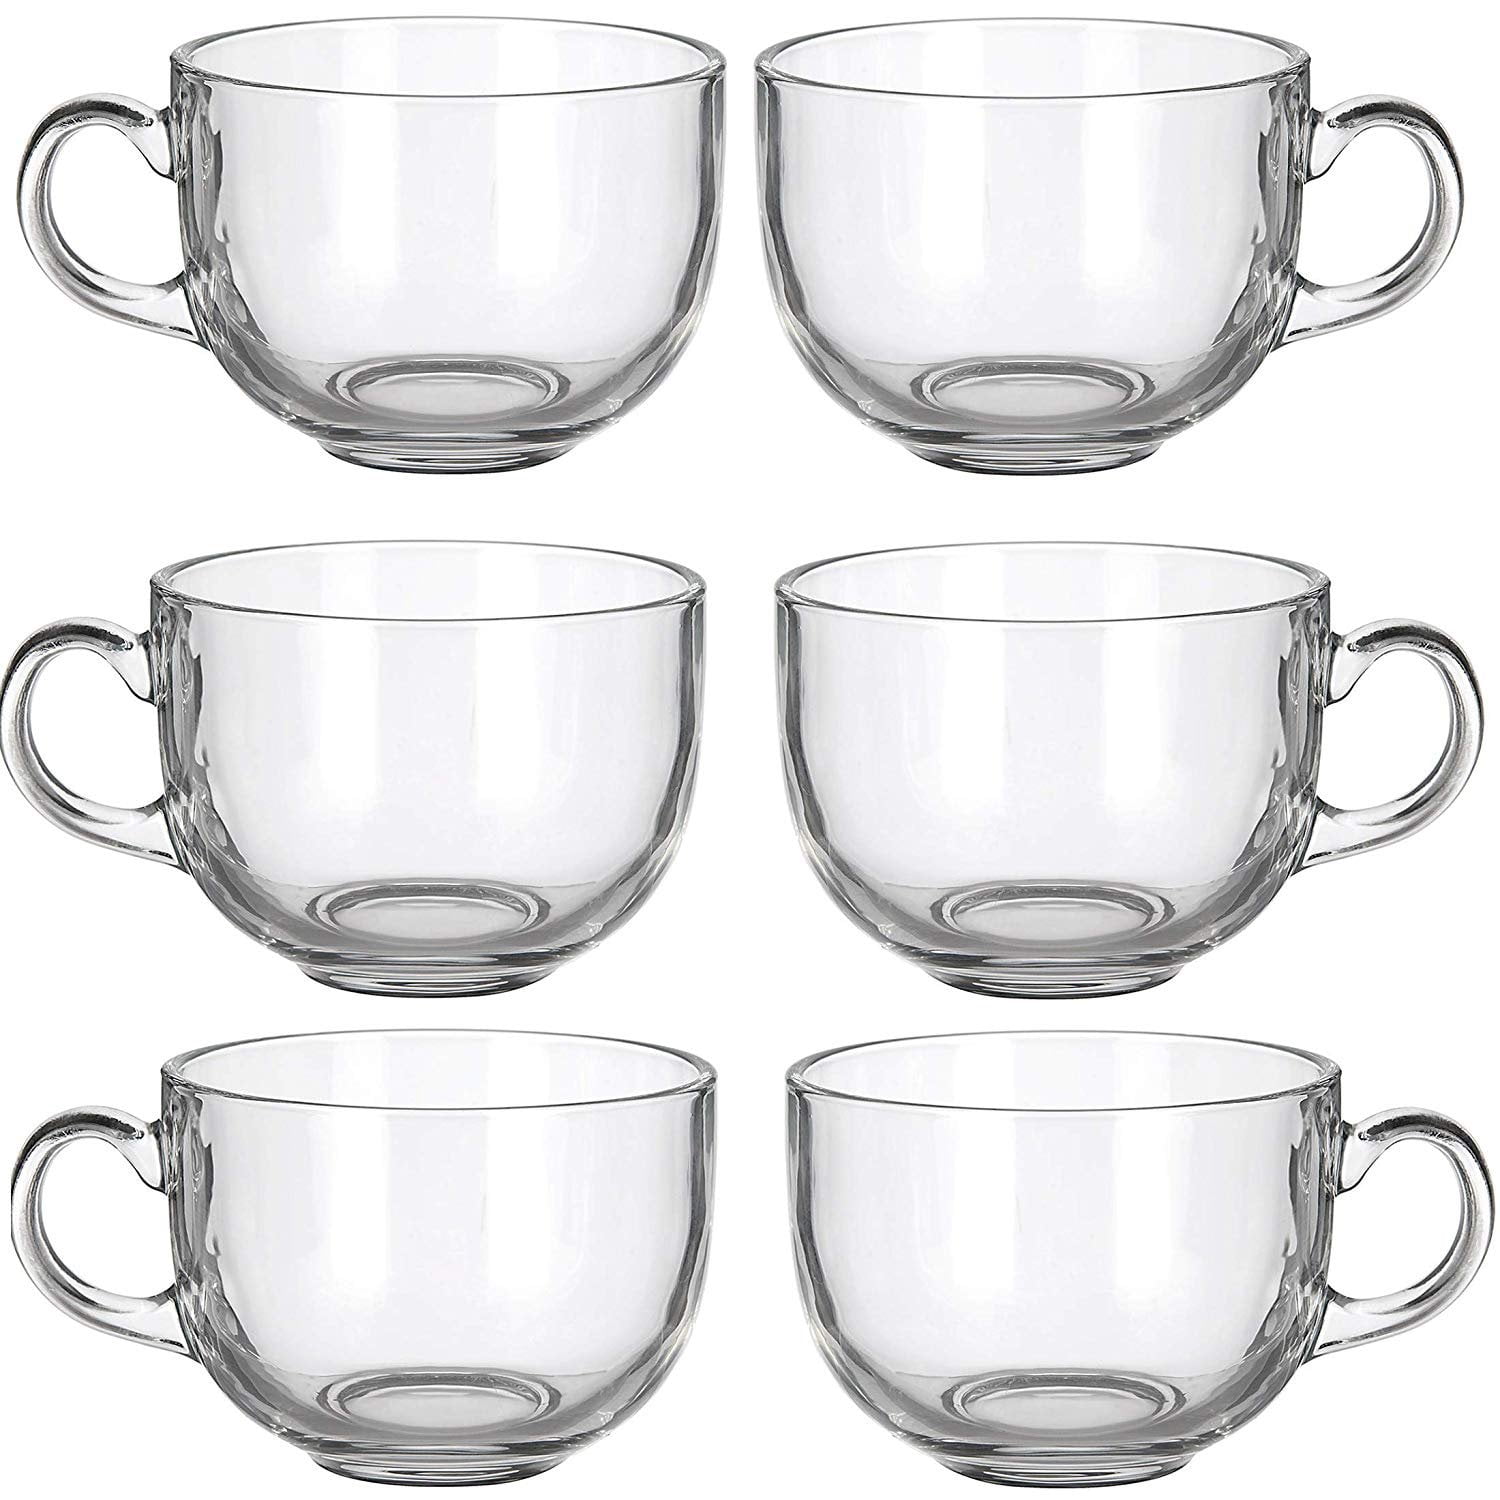 Lav Glass Coffee Mugs for Hot Beverages Set of 6 - Clear Coffee Mug with Handle 9 oz - for Tea, Espresso, Cappuccino - Glass LAT